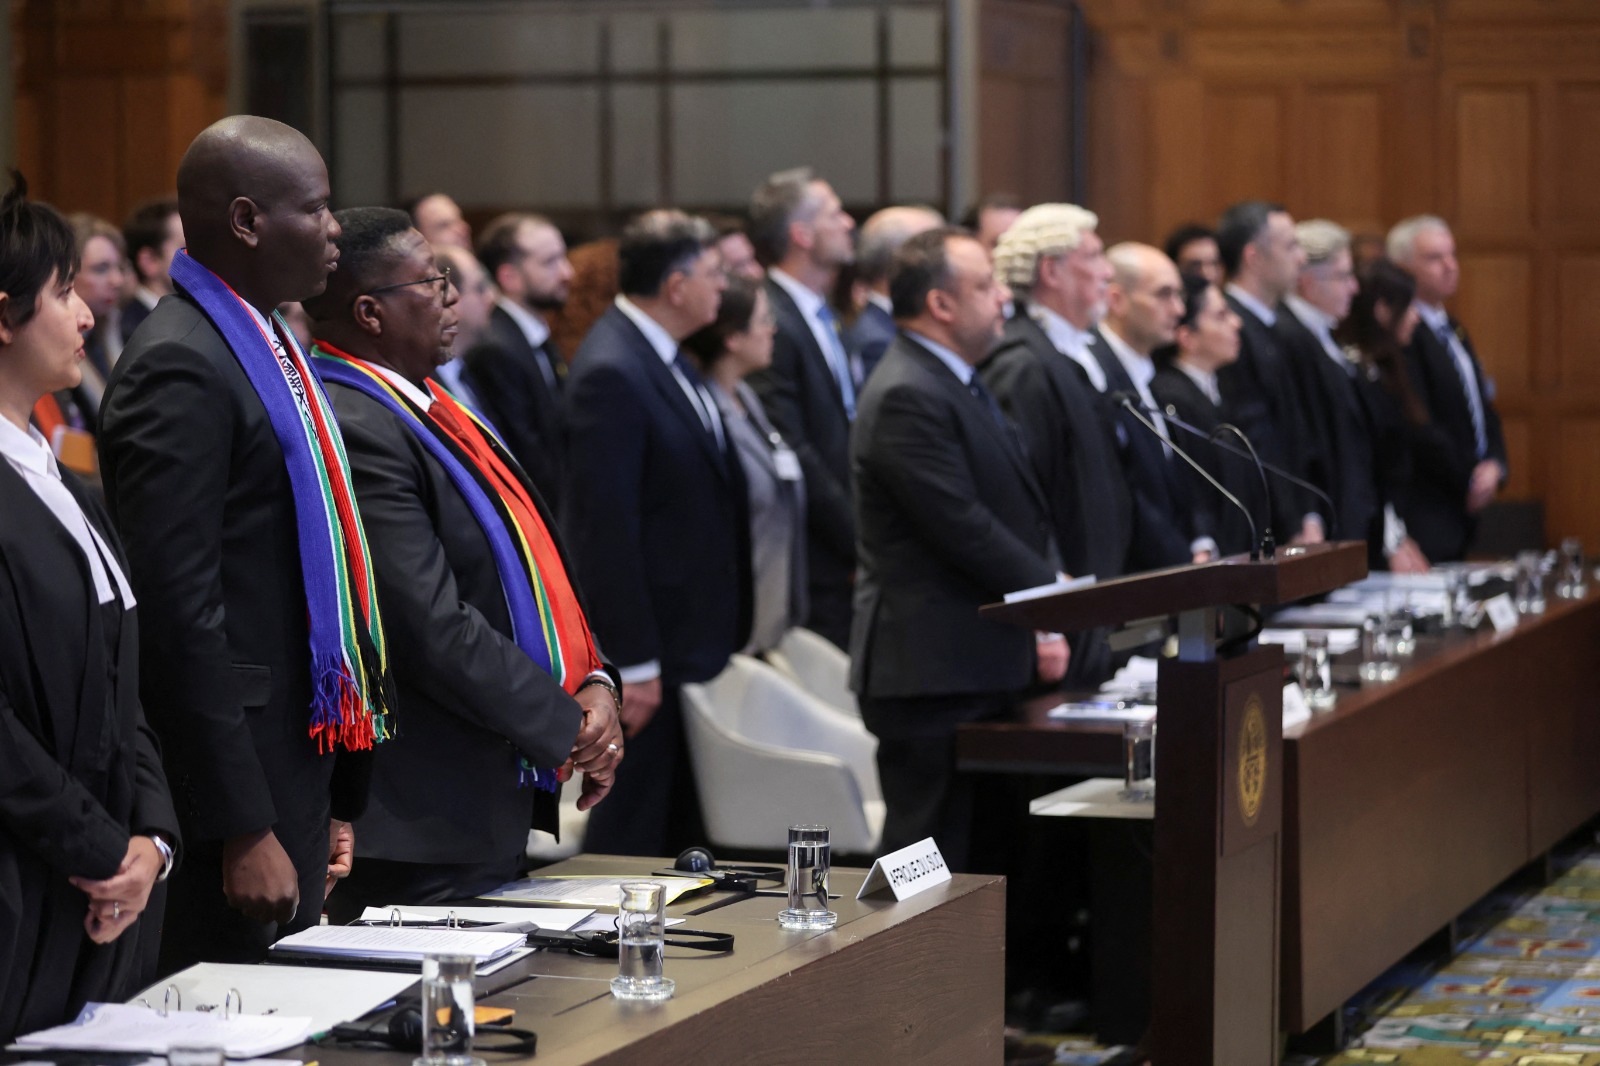 South Africa's Minister of Justice Ronald Lamola and the delegation stand as judges at the International Court of Justice (ICJ) hear a request for emergency measures by South Africa, who asked the court to order Israel to stop its military actions in Gaza and to desist from what South Africa says are genocidal acts committed against Palestinians during the war with Hamas in Gaza, in The Hague, Netherlands, January 11, 2024. REUTERS/Thilo Schmuelgen